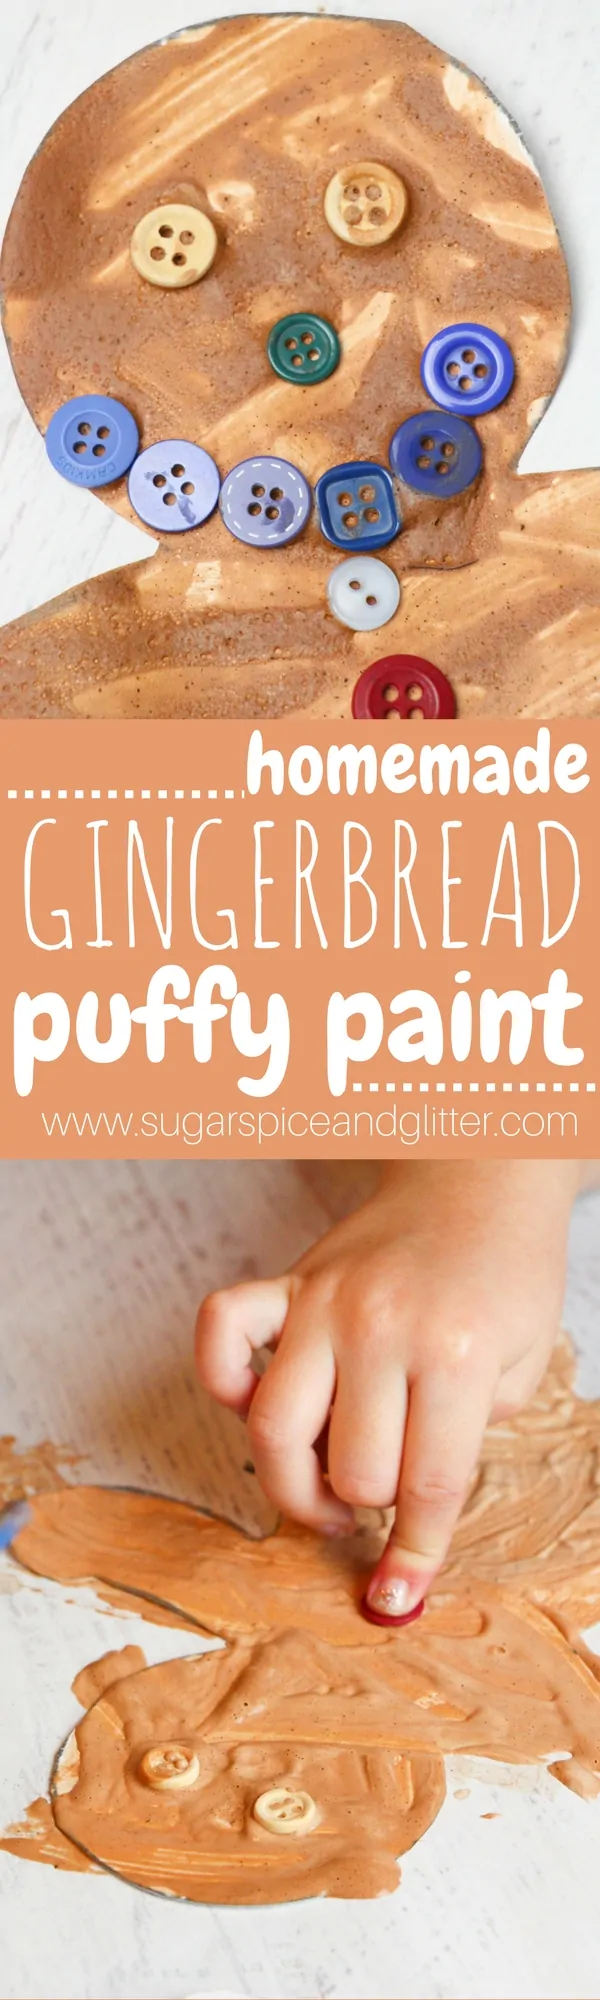 Gingerbread Puffy Paint (with Video)